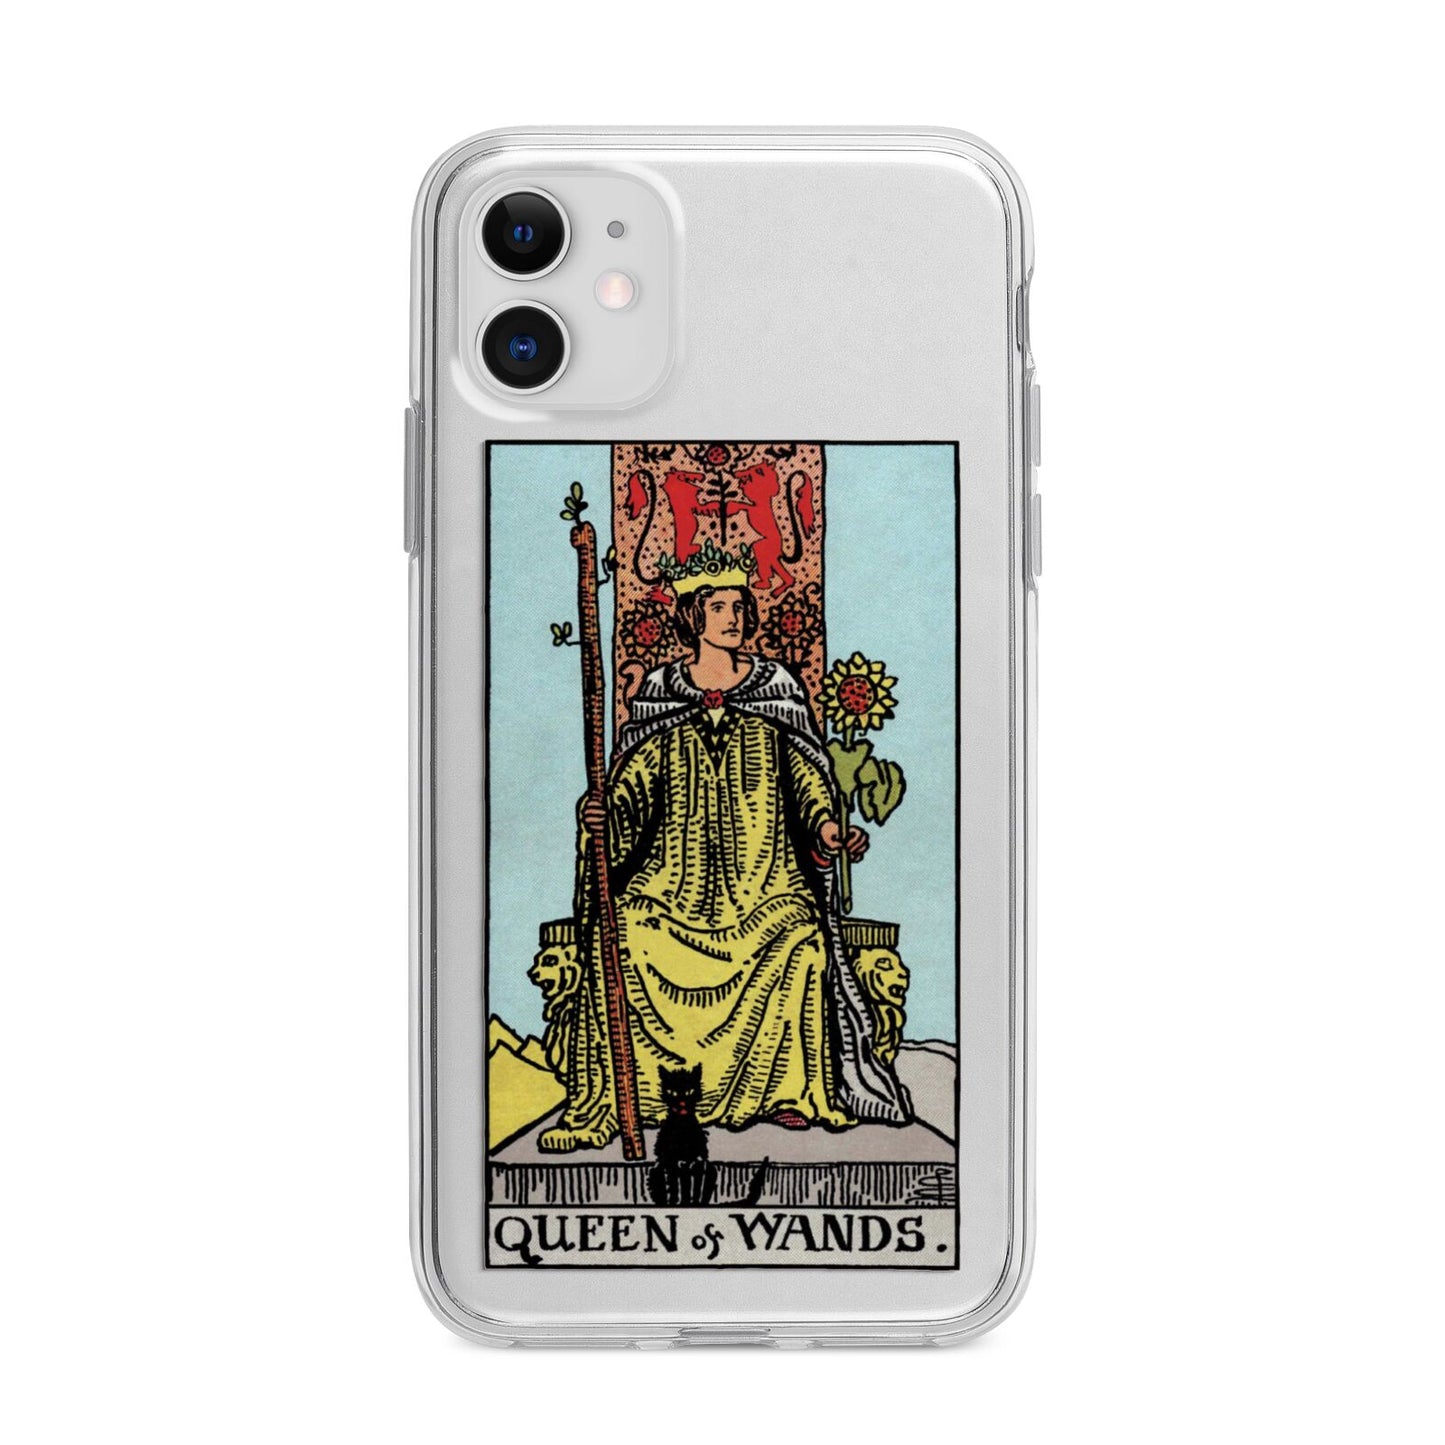 Queen of Wands Tarot Card Apple iPhone 11 in White with Bumper Case